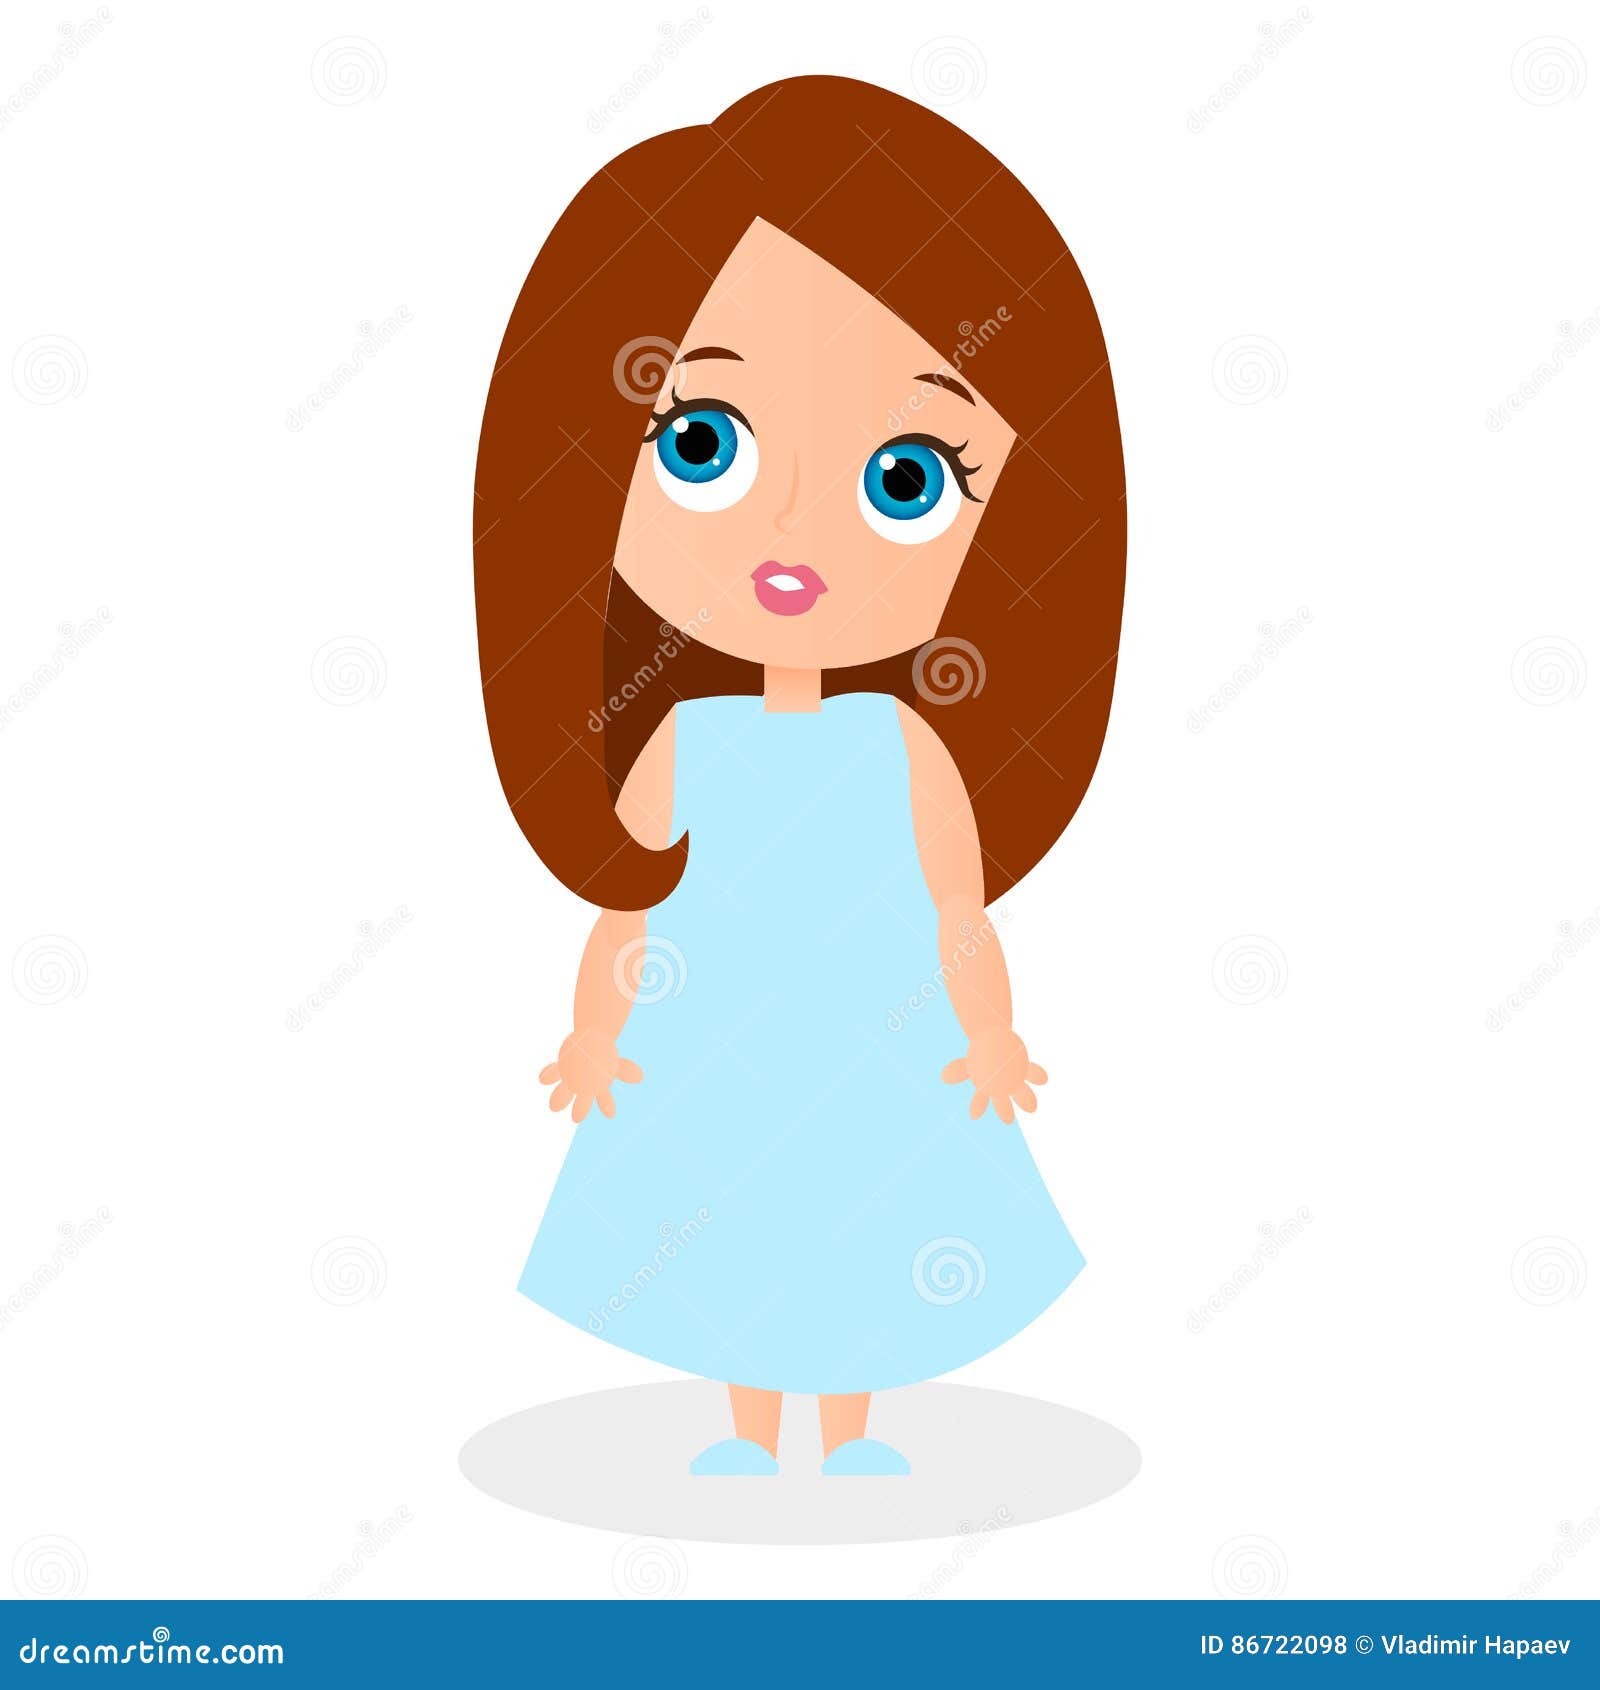 Cute Girl Cartoon Character. Vector Illustration Eps 10 Isolated on White  Background. Flat Cartoon Style. Stock Illustration - Illustration of  design, icon: 86722098